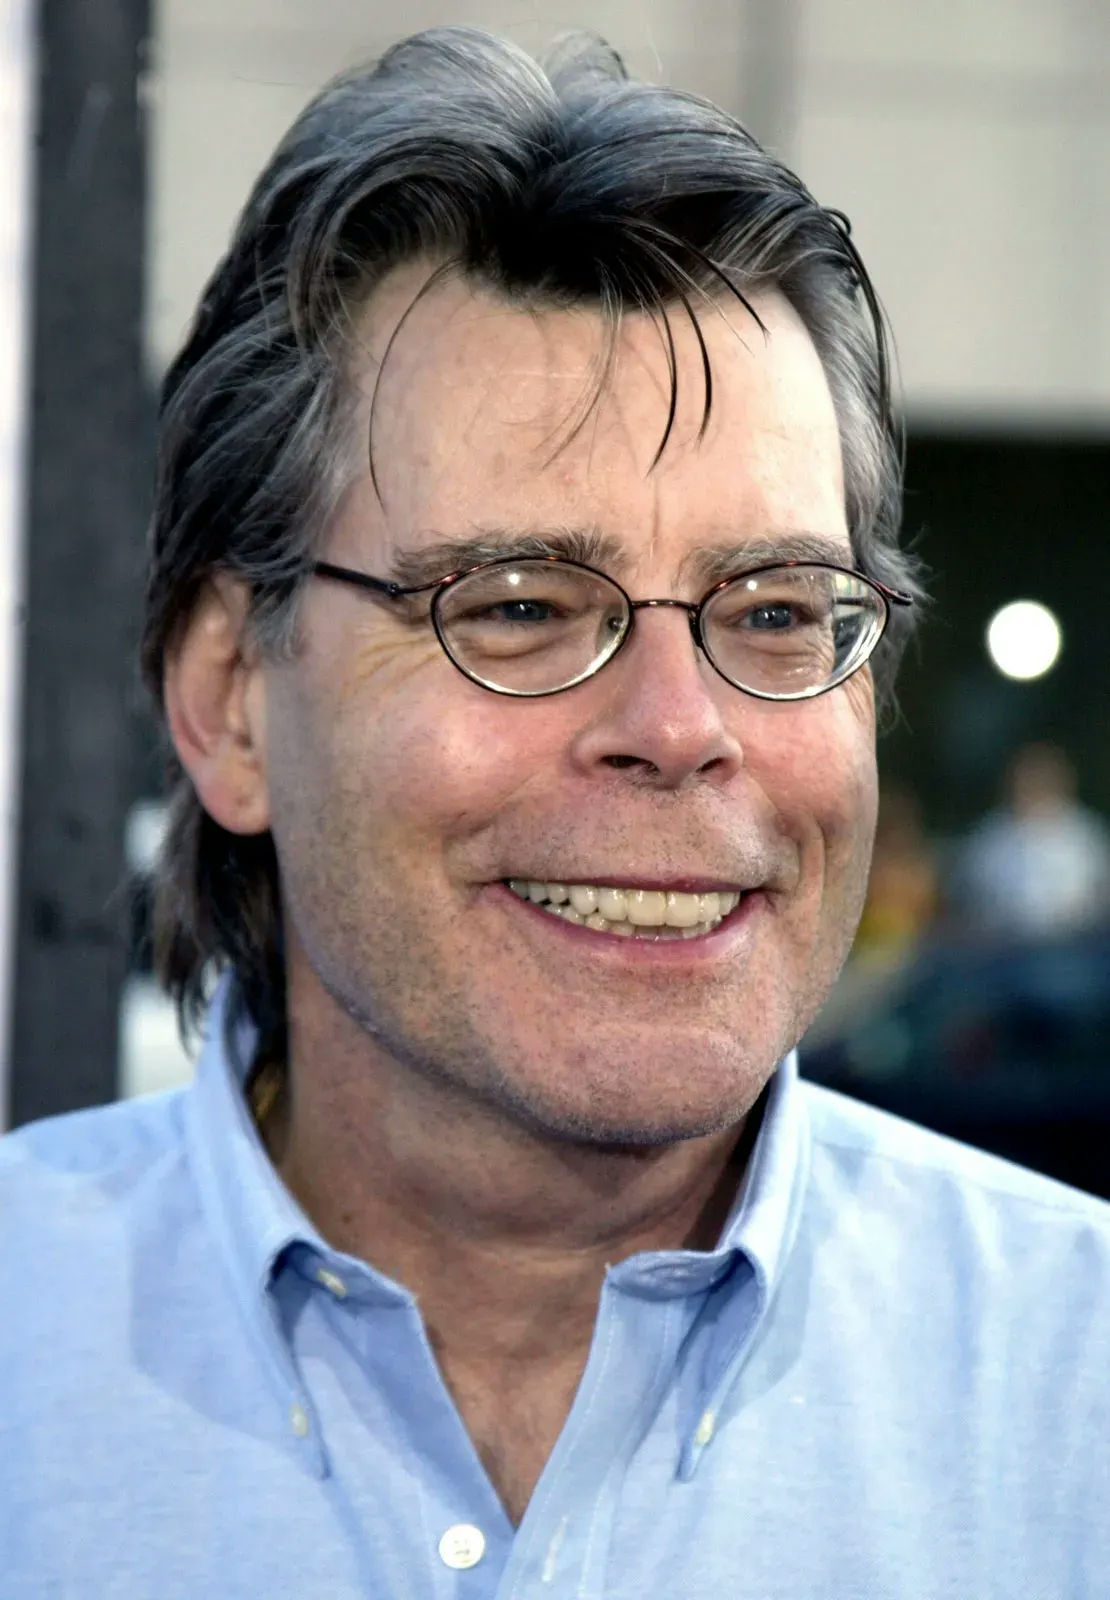 Stephen Edwin King (born September 21, 1947) is an American author of horror, supernatural fiction, suspense, crime, science-fiction, and fantasy novels. 